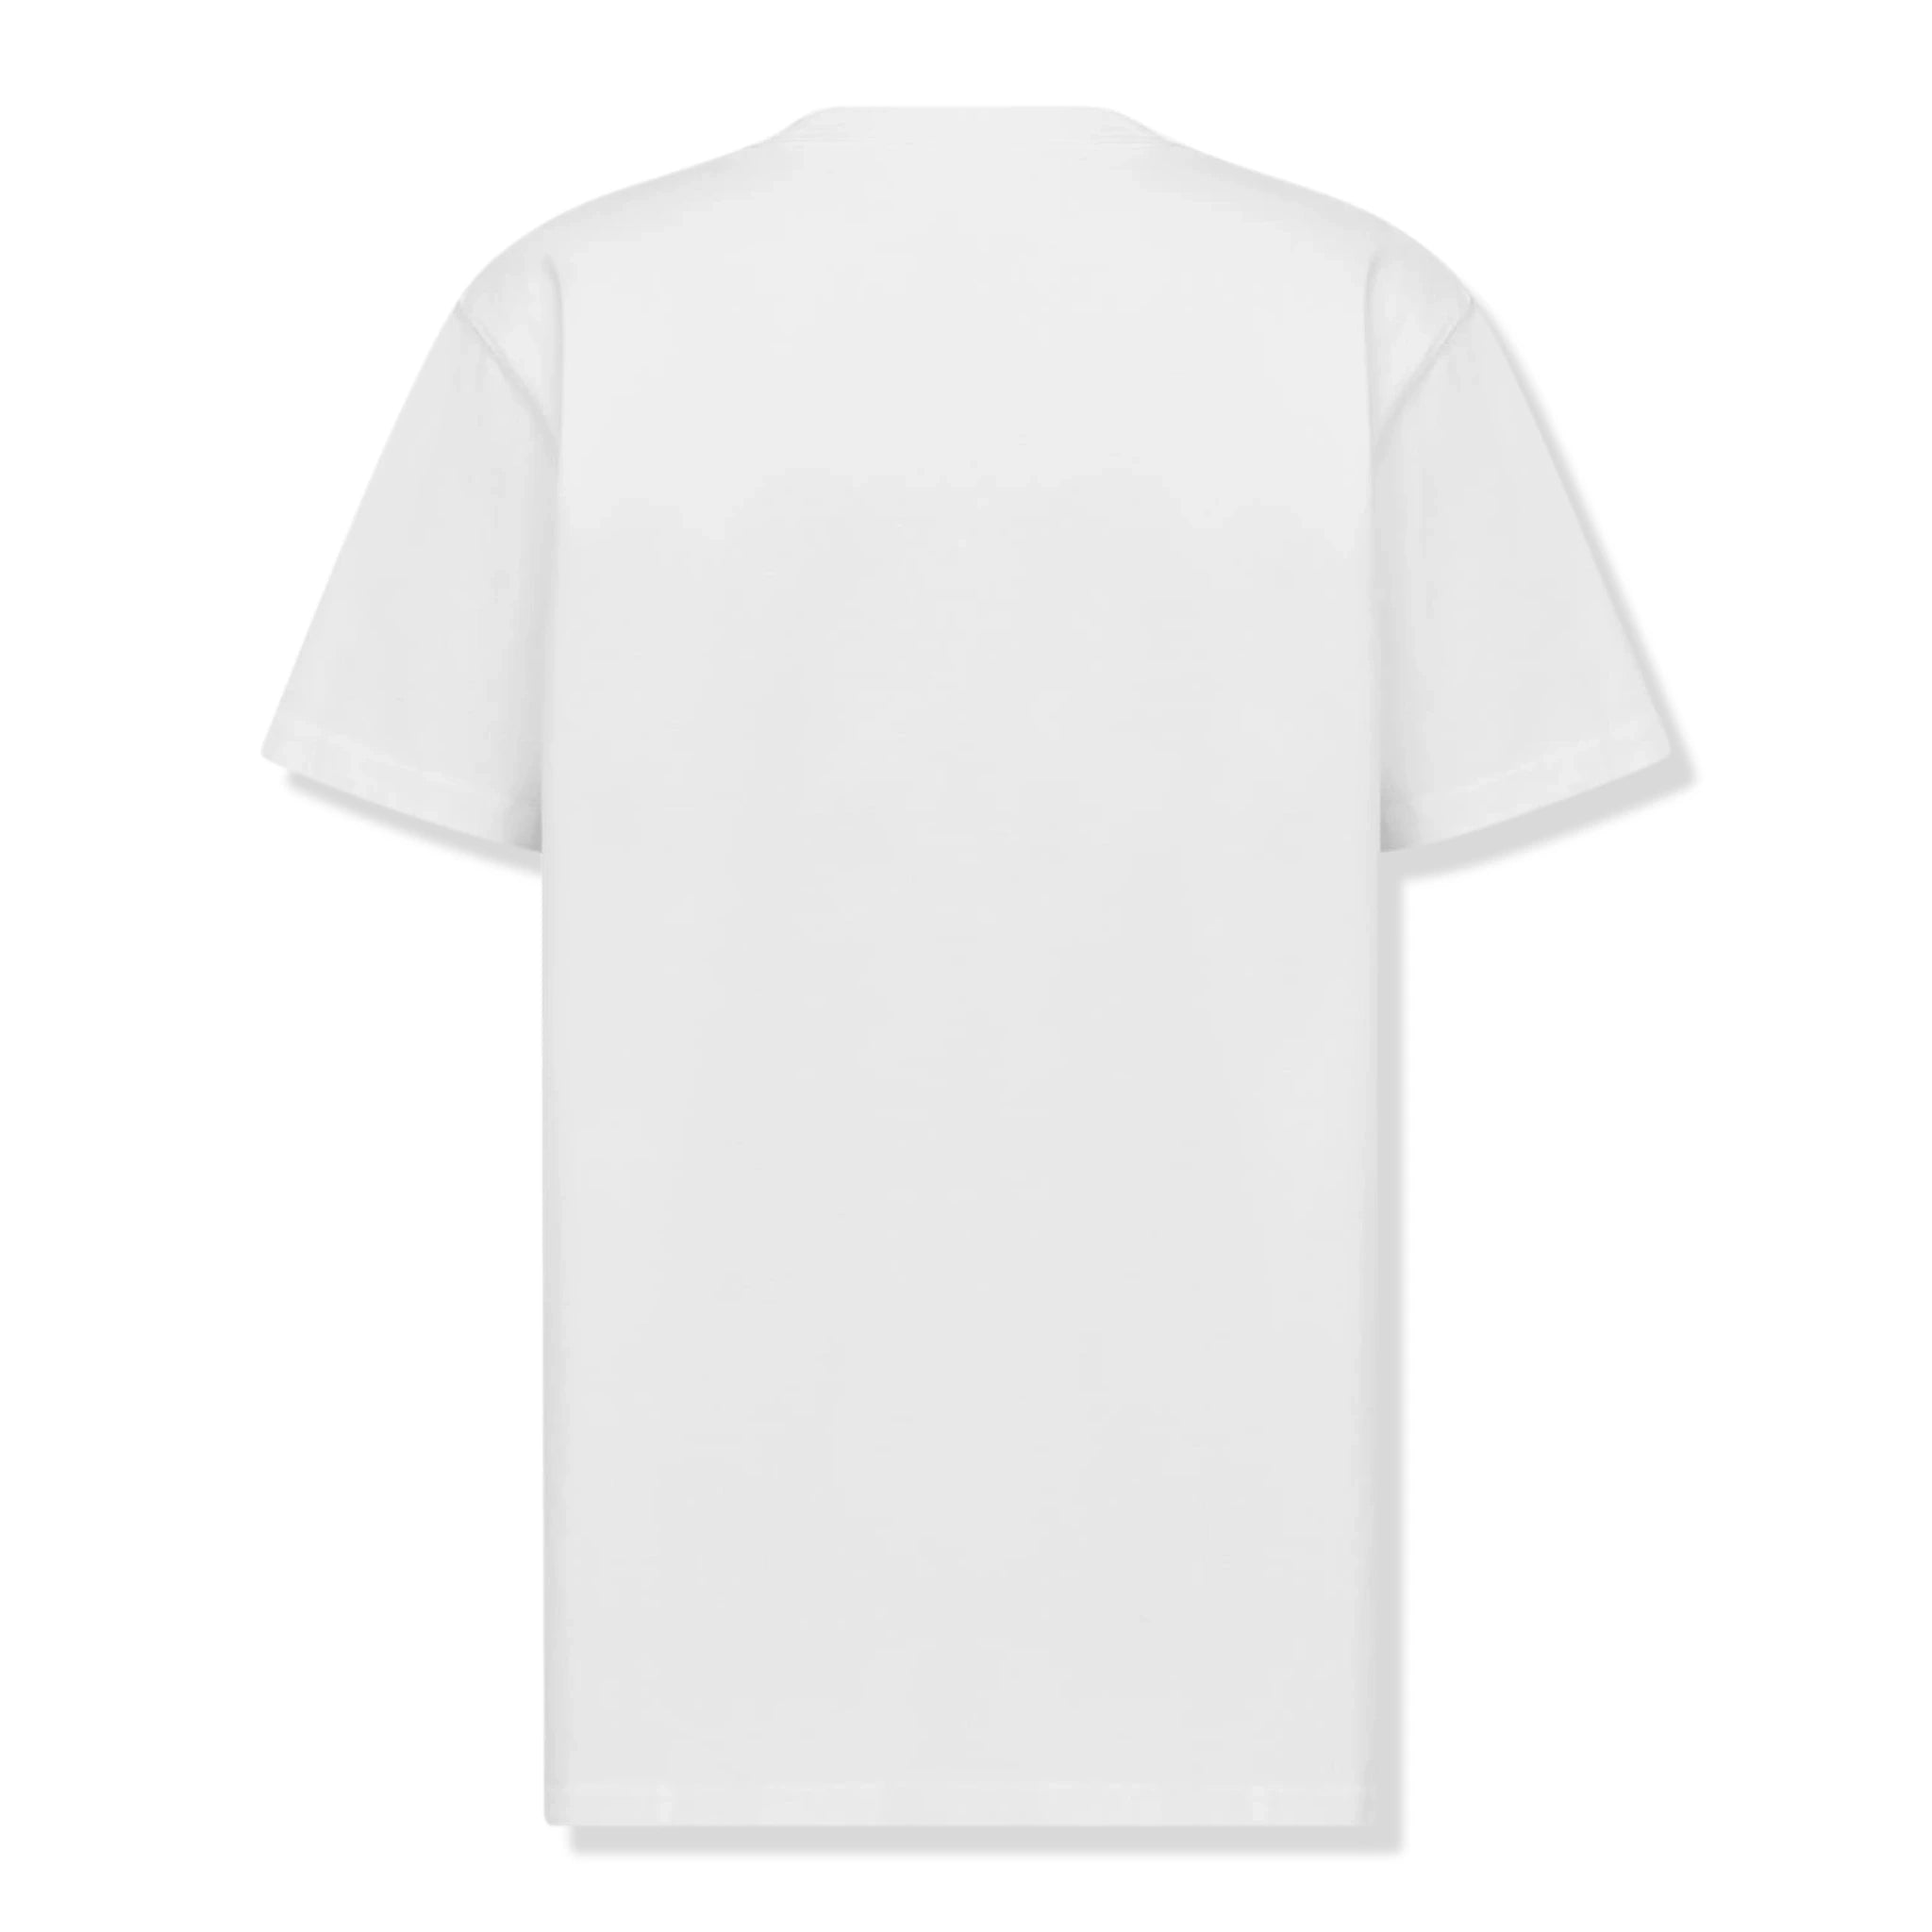 Back view of Dior 'Christian Dior Couture' Relaxed Fit White T Shirt 343J696C0554_C088